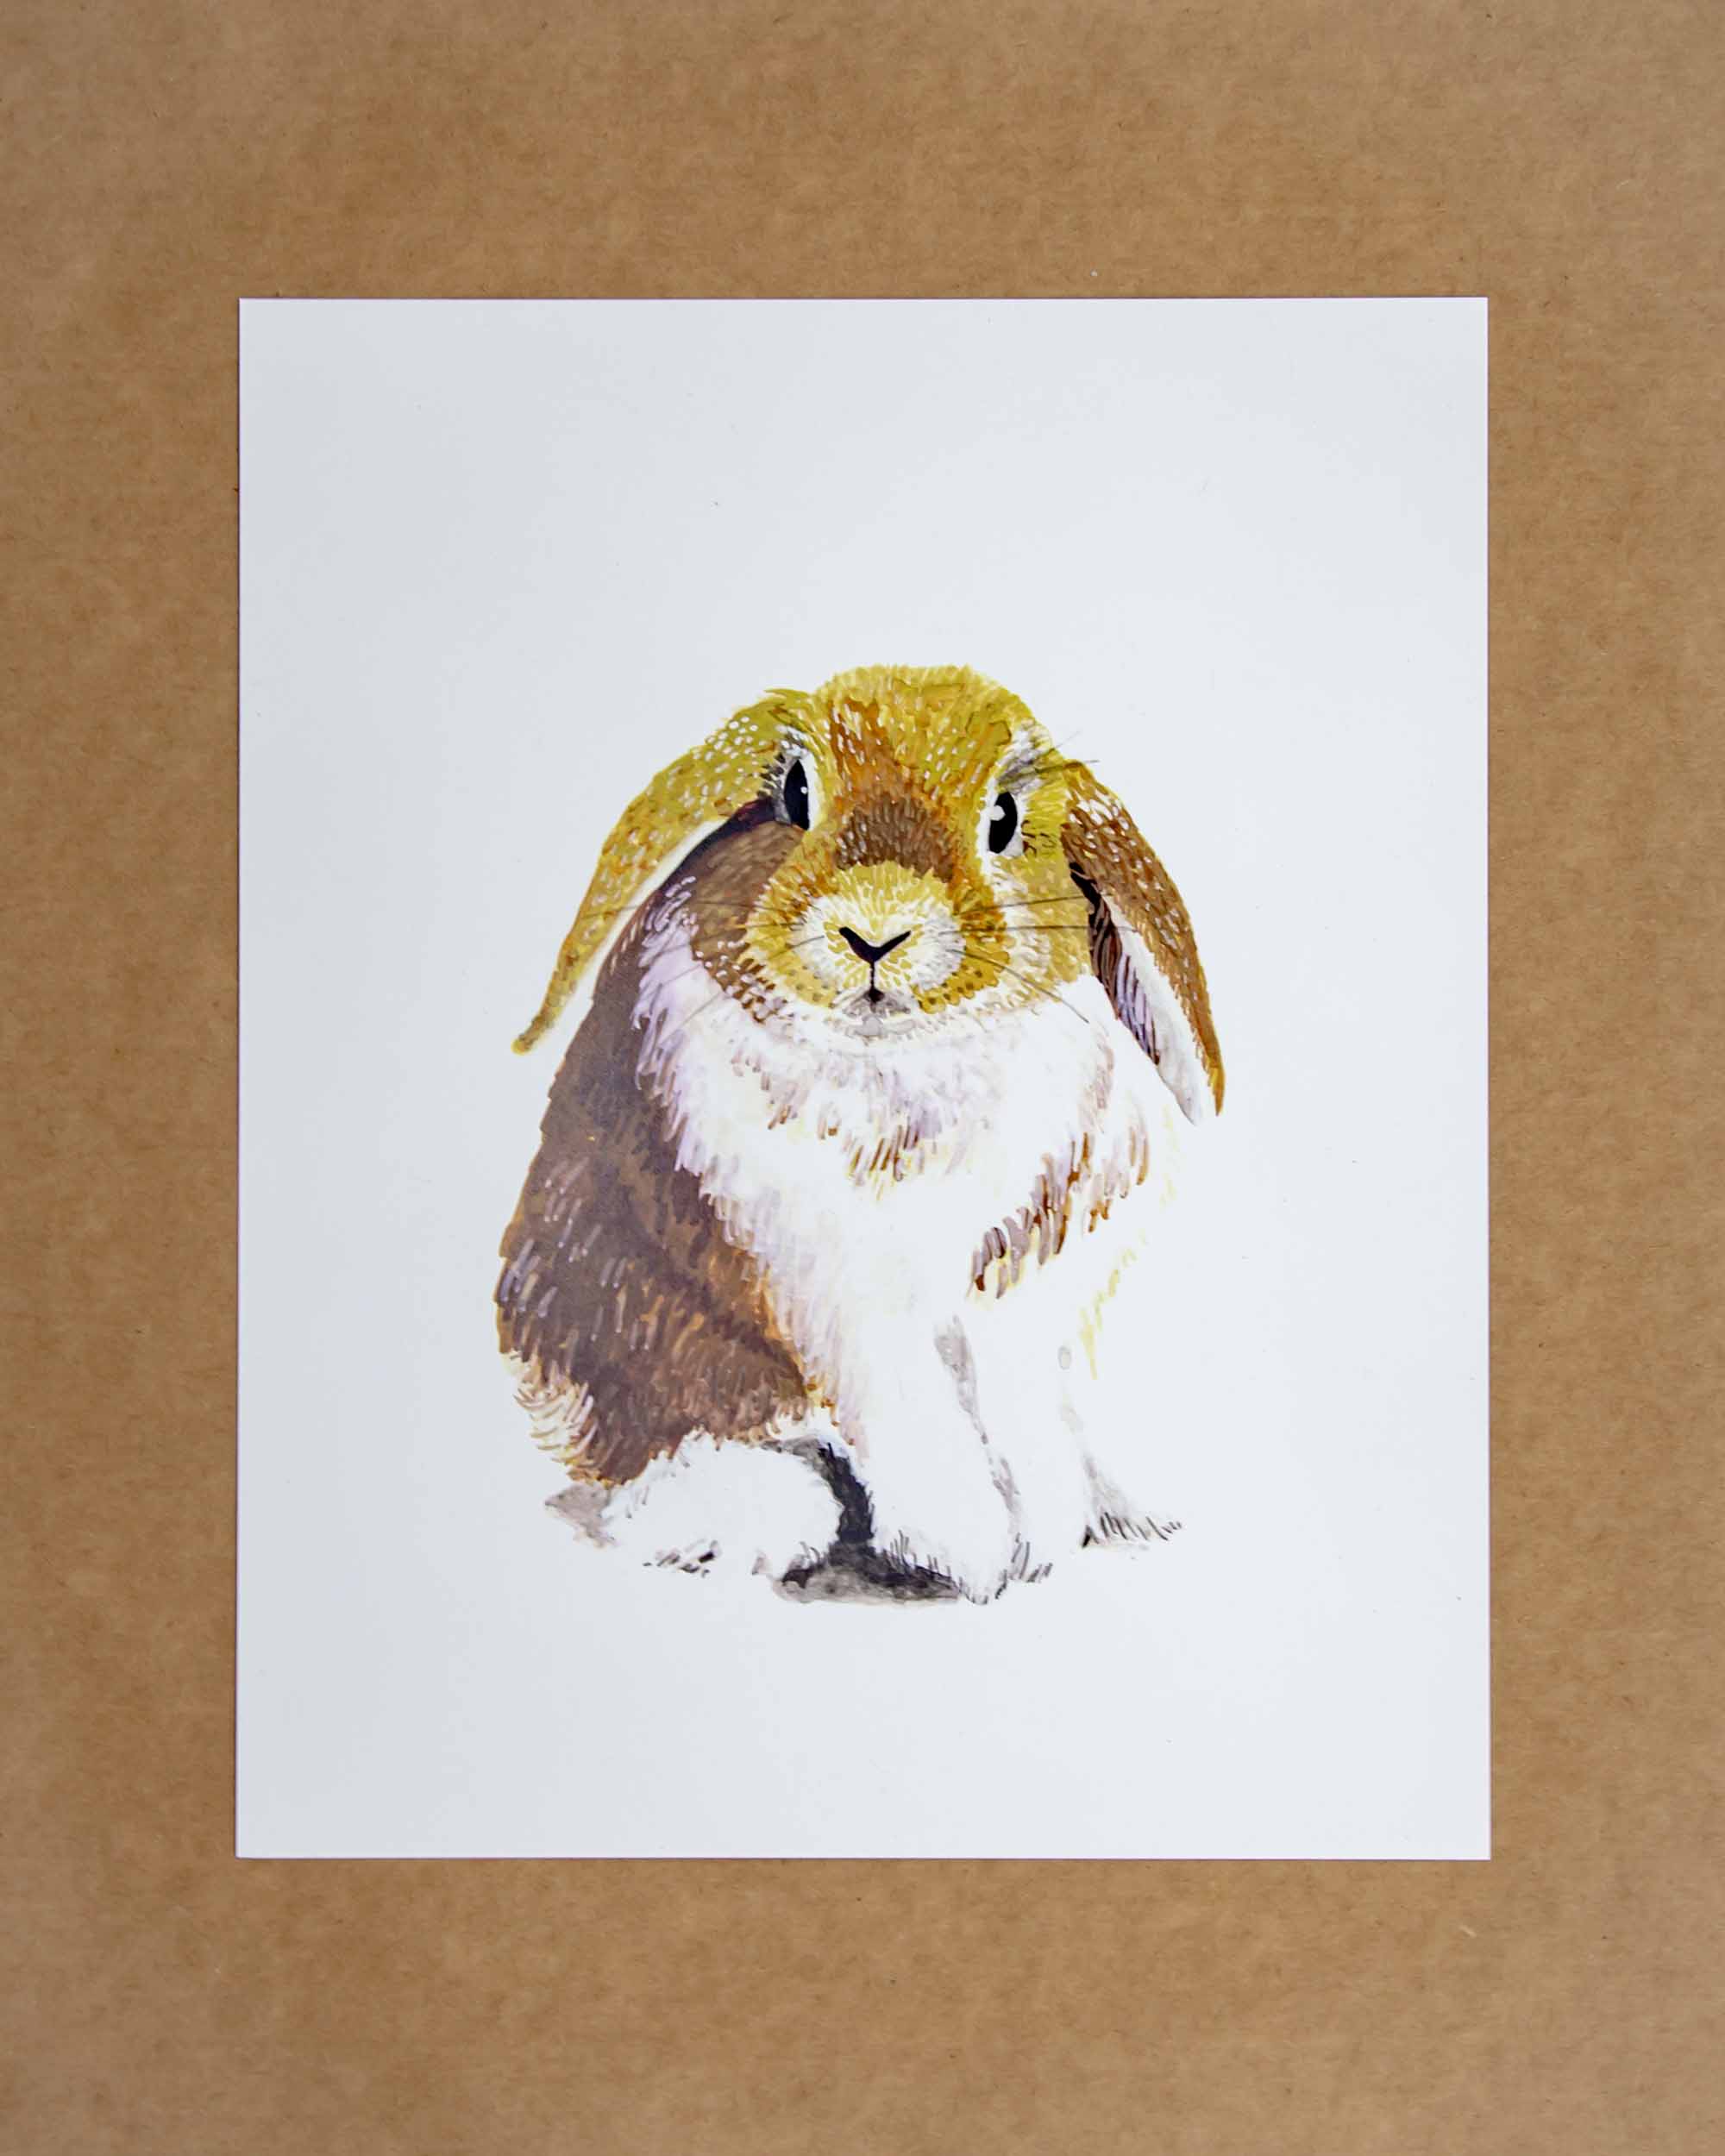 Front Paper Bunny Print 8x10 - Mortise And Tenon